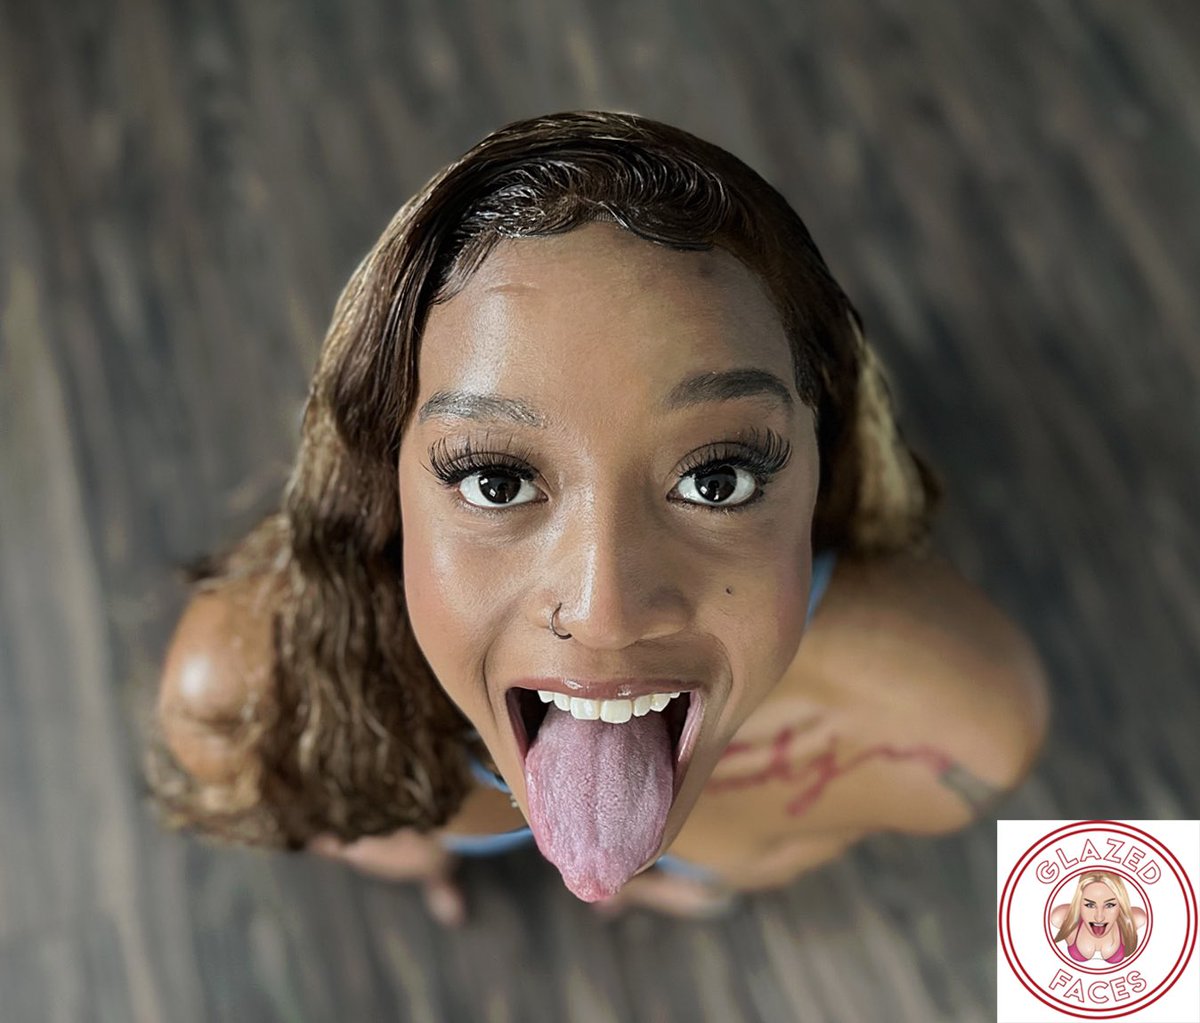 Mena is ready for your load now 💦 🍩 @imenacarlisle 🎥 @glazed_faces